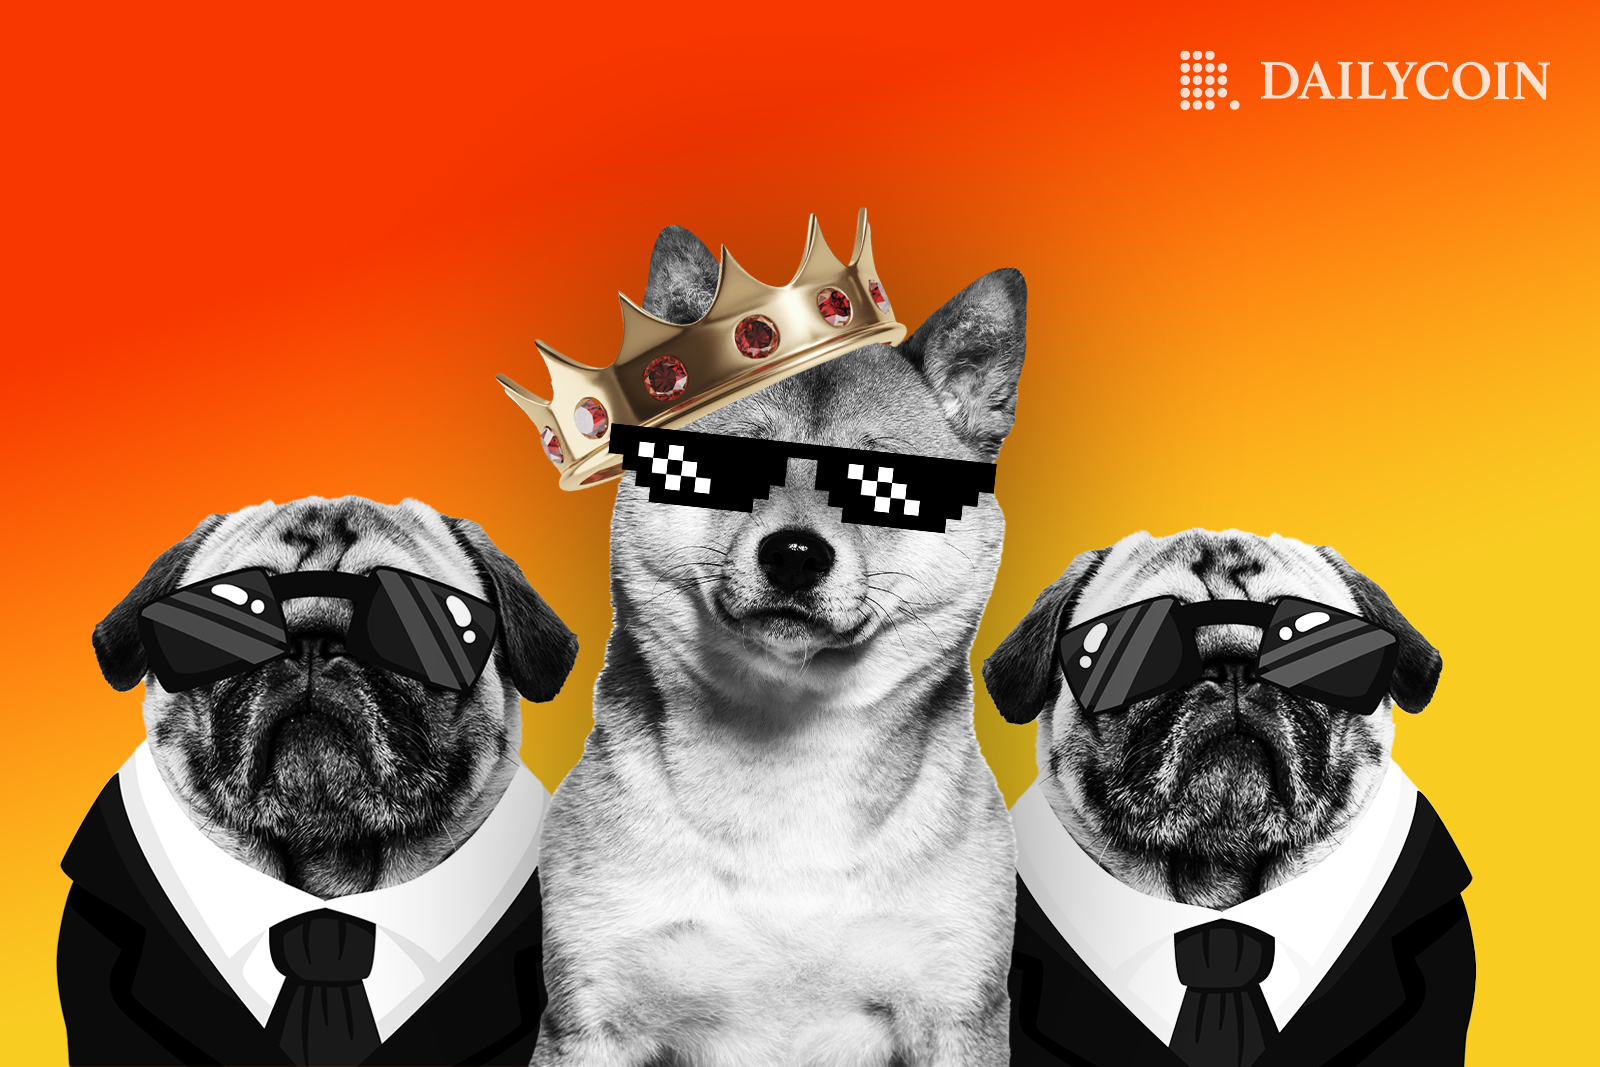 Shiba Inu in between two pugs with tuxedos wearing a crown and sunglasses